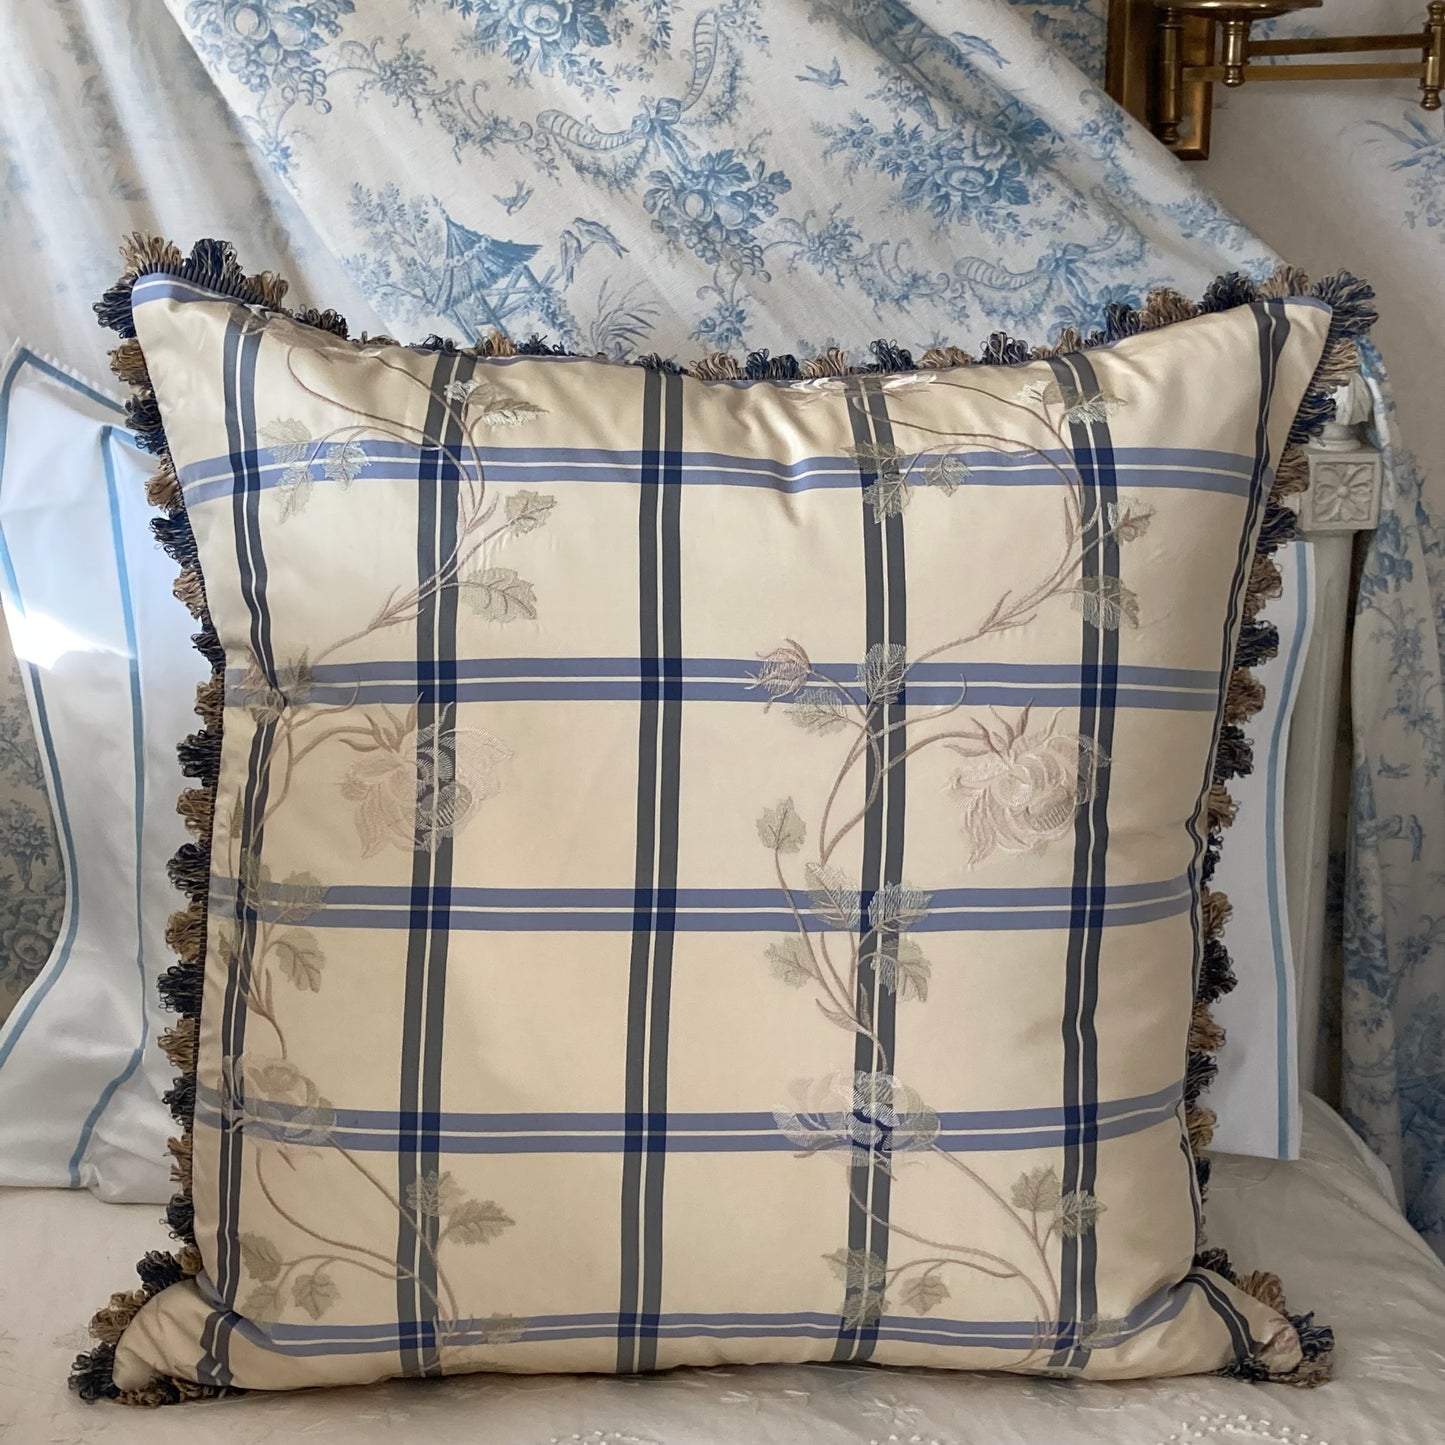 Thibaut Longwood Blue Garden 23 X 23 Square Designer Pillow Back with Down Feather Insert